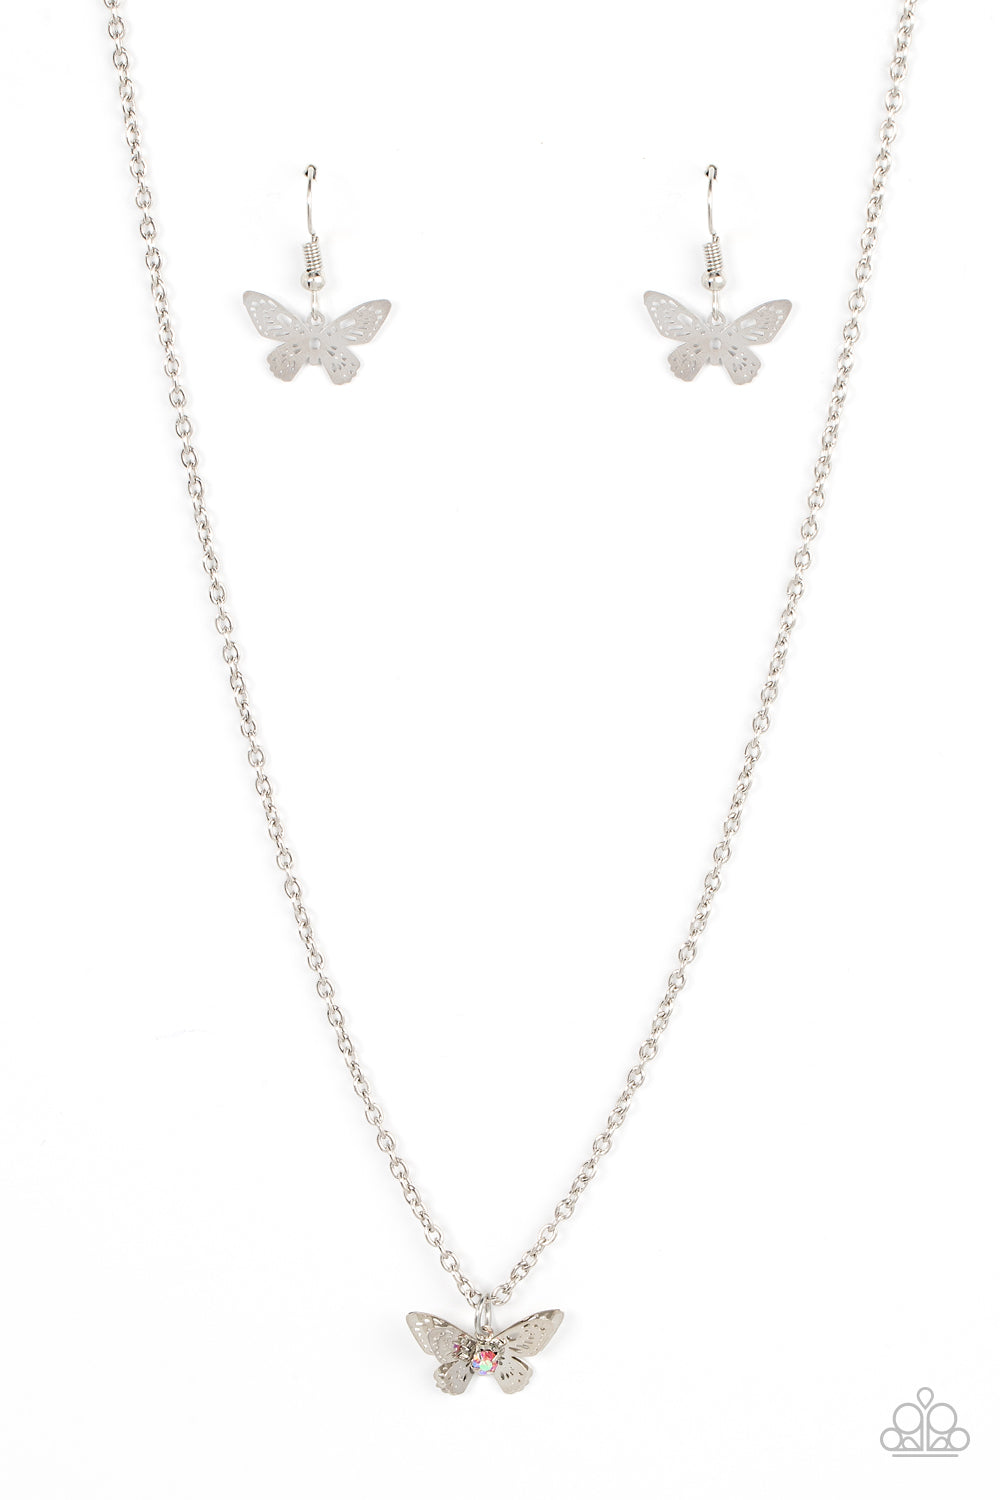 PAPARAZZI Flutter Love - Pink | Iridescent Rhinestone Butterfly Charm Necklace